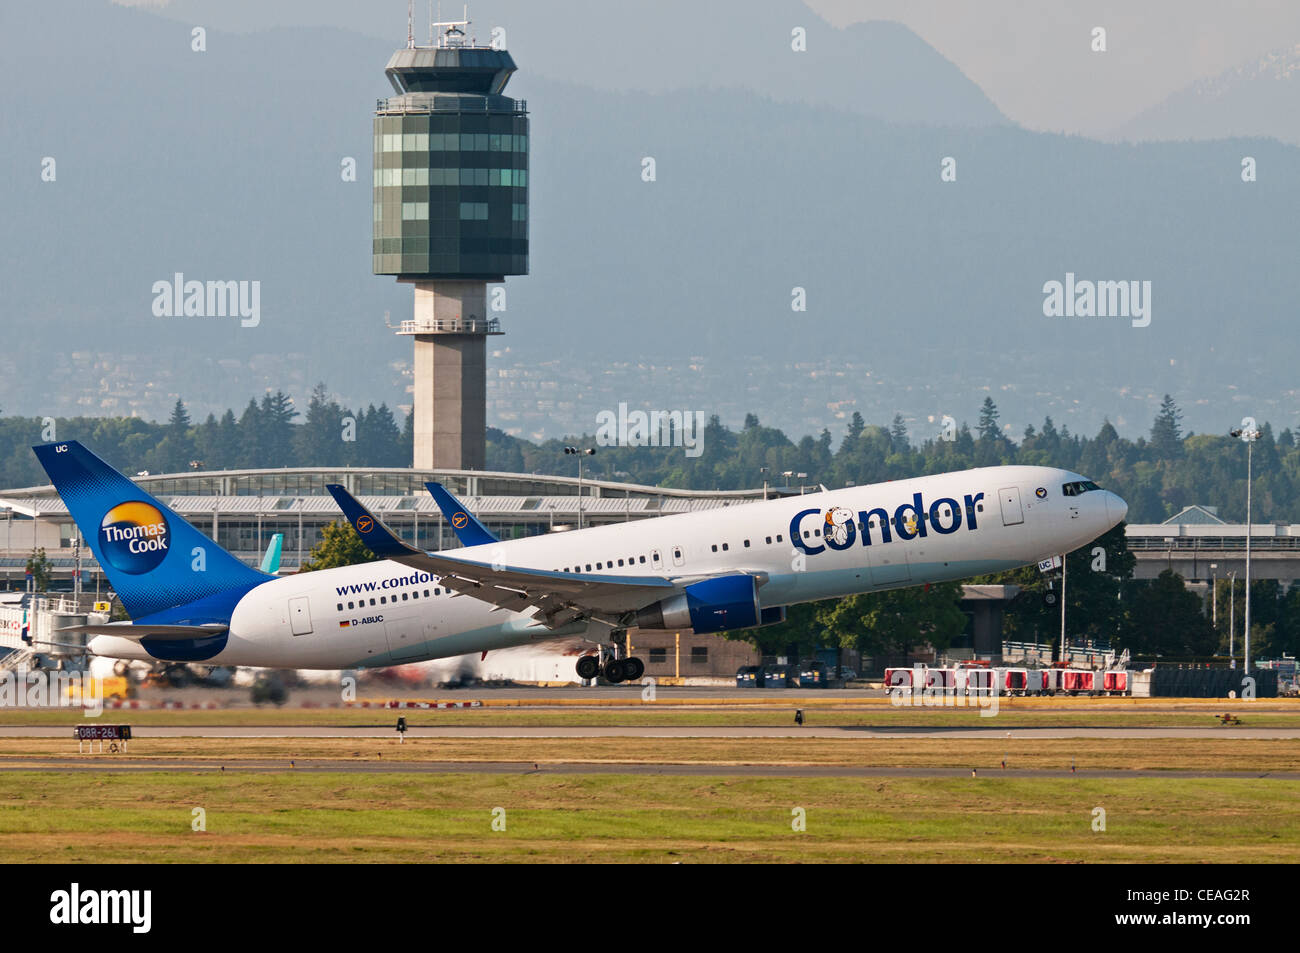 A Condor (Thomas Cook) Boeing 757 jetliner takes off from Vancouver International Airport. Stock Photo